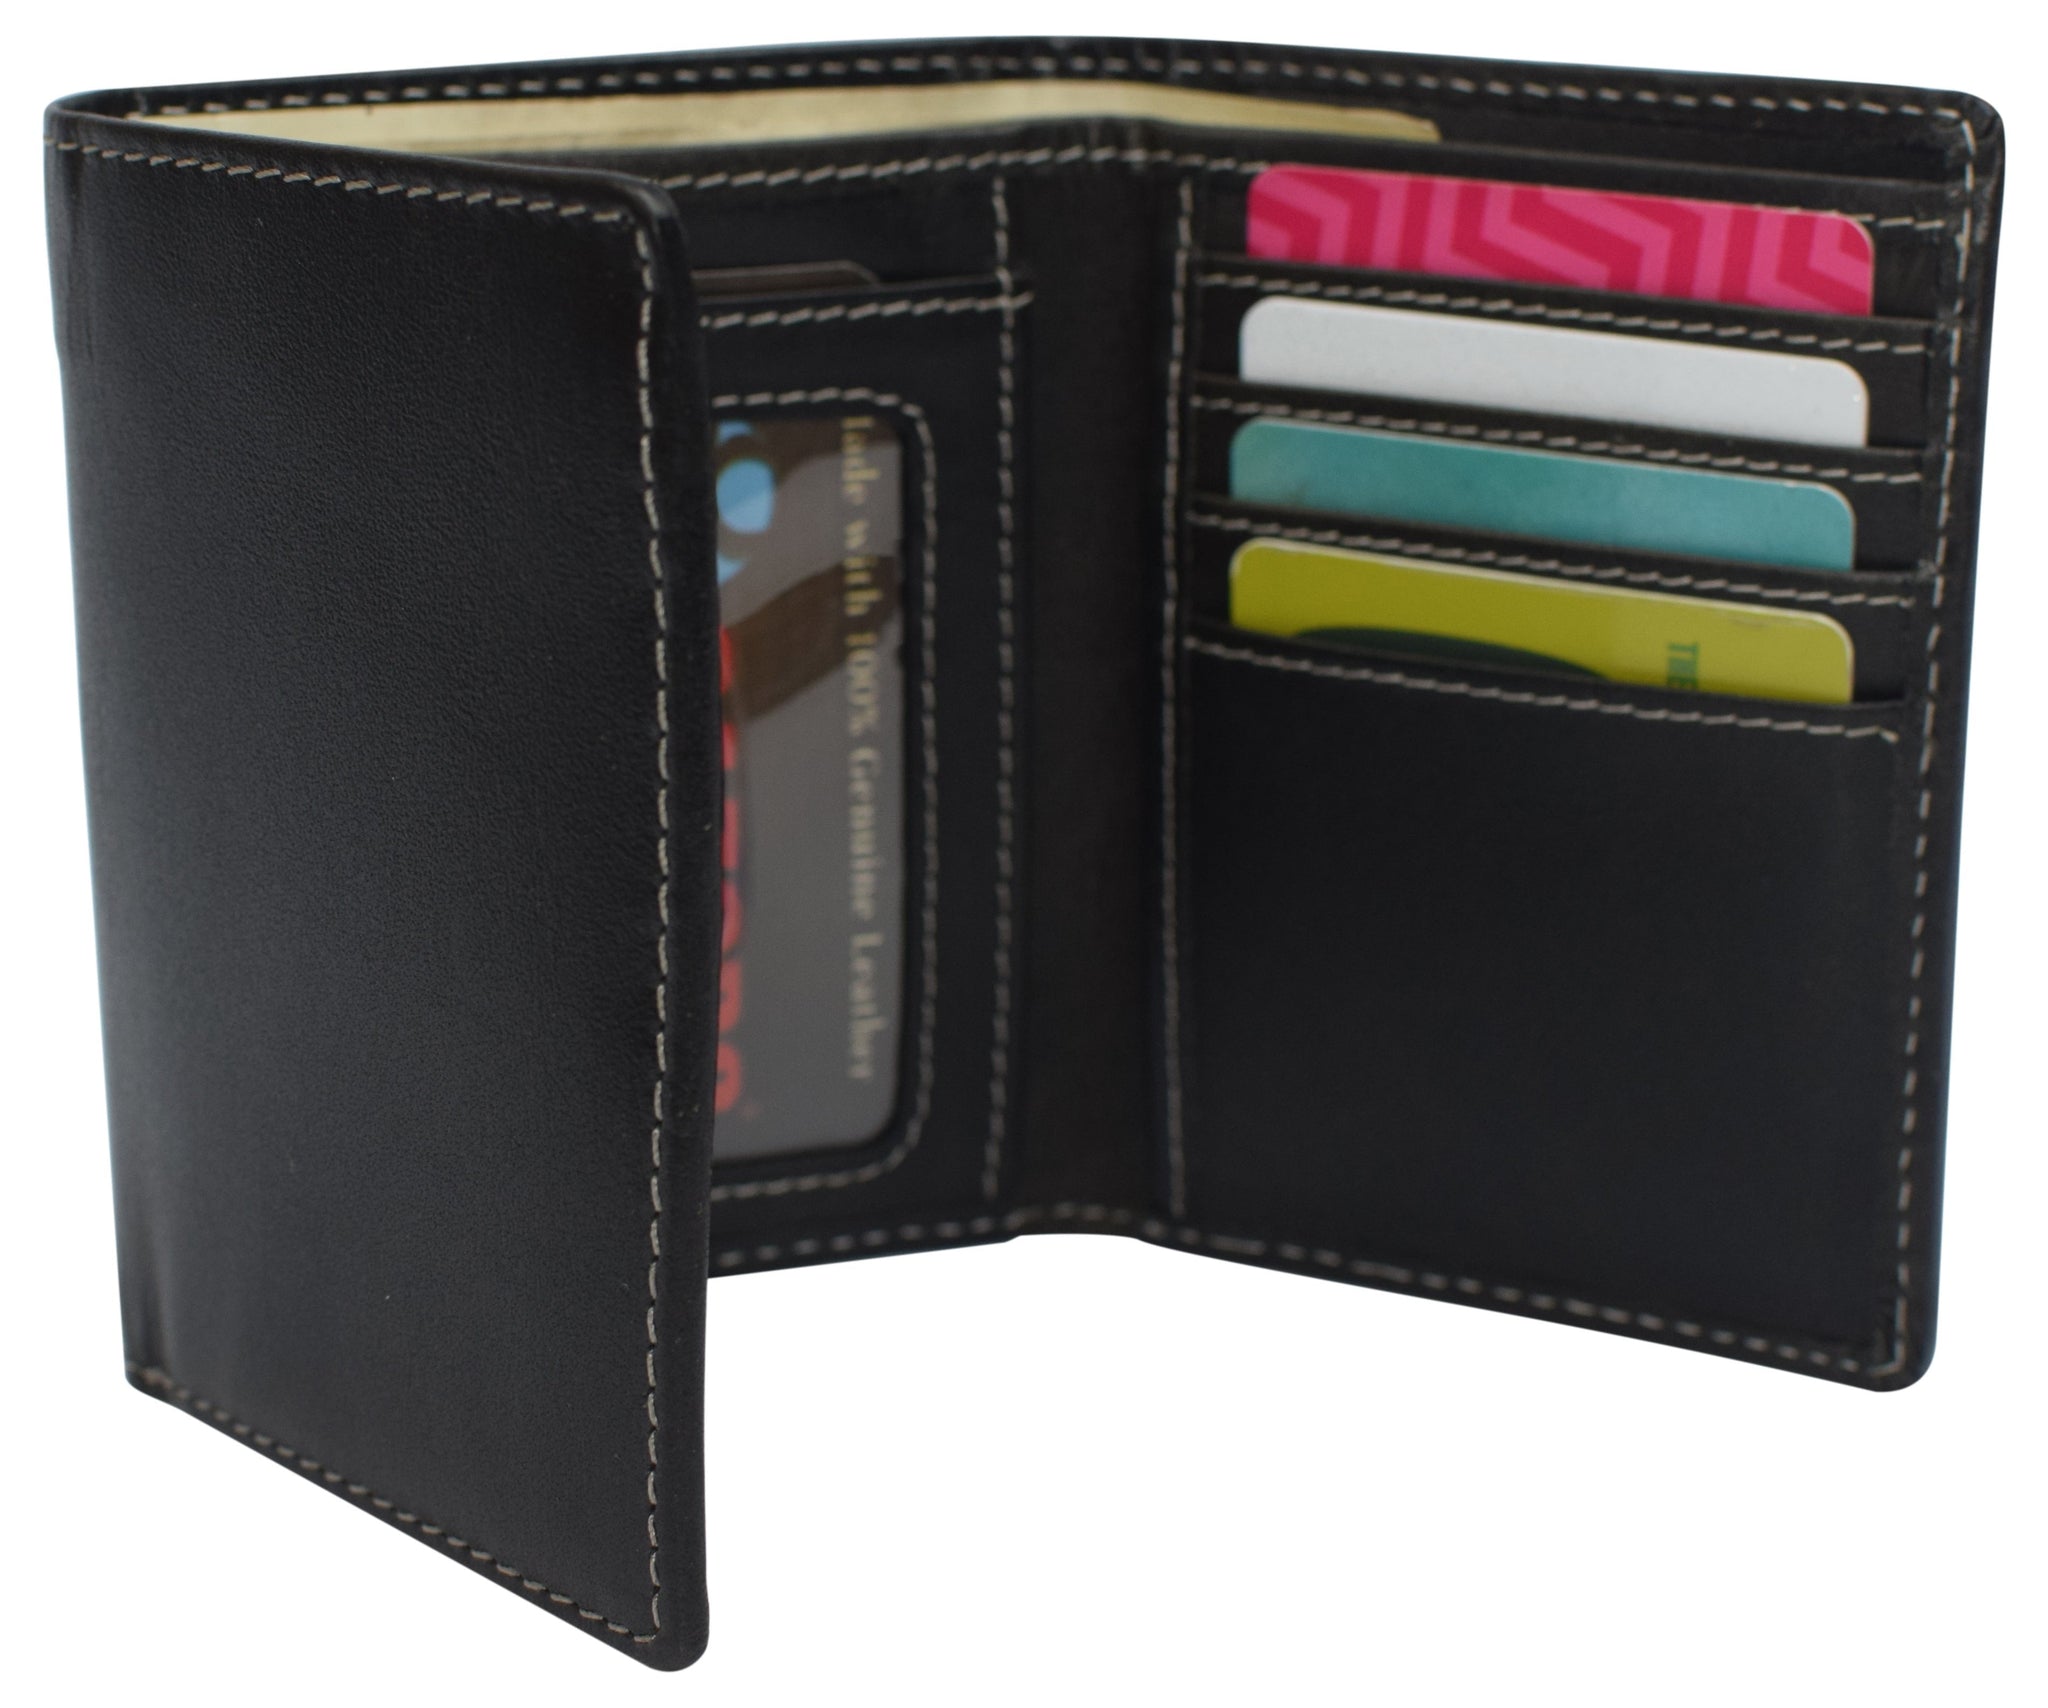 Classic Men’s Wallet with I.D and Coin Pocket and RFID in Genuine Leather Black/Red / Genuine Leather